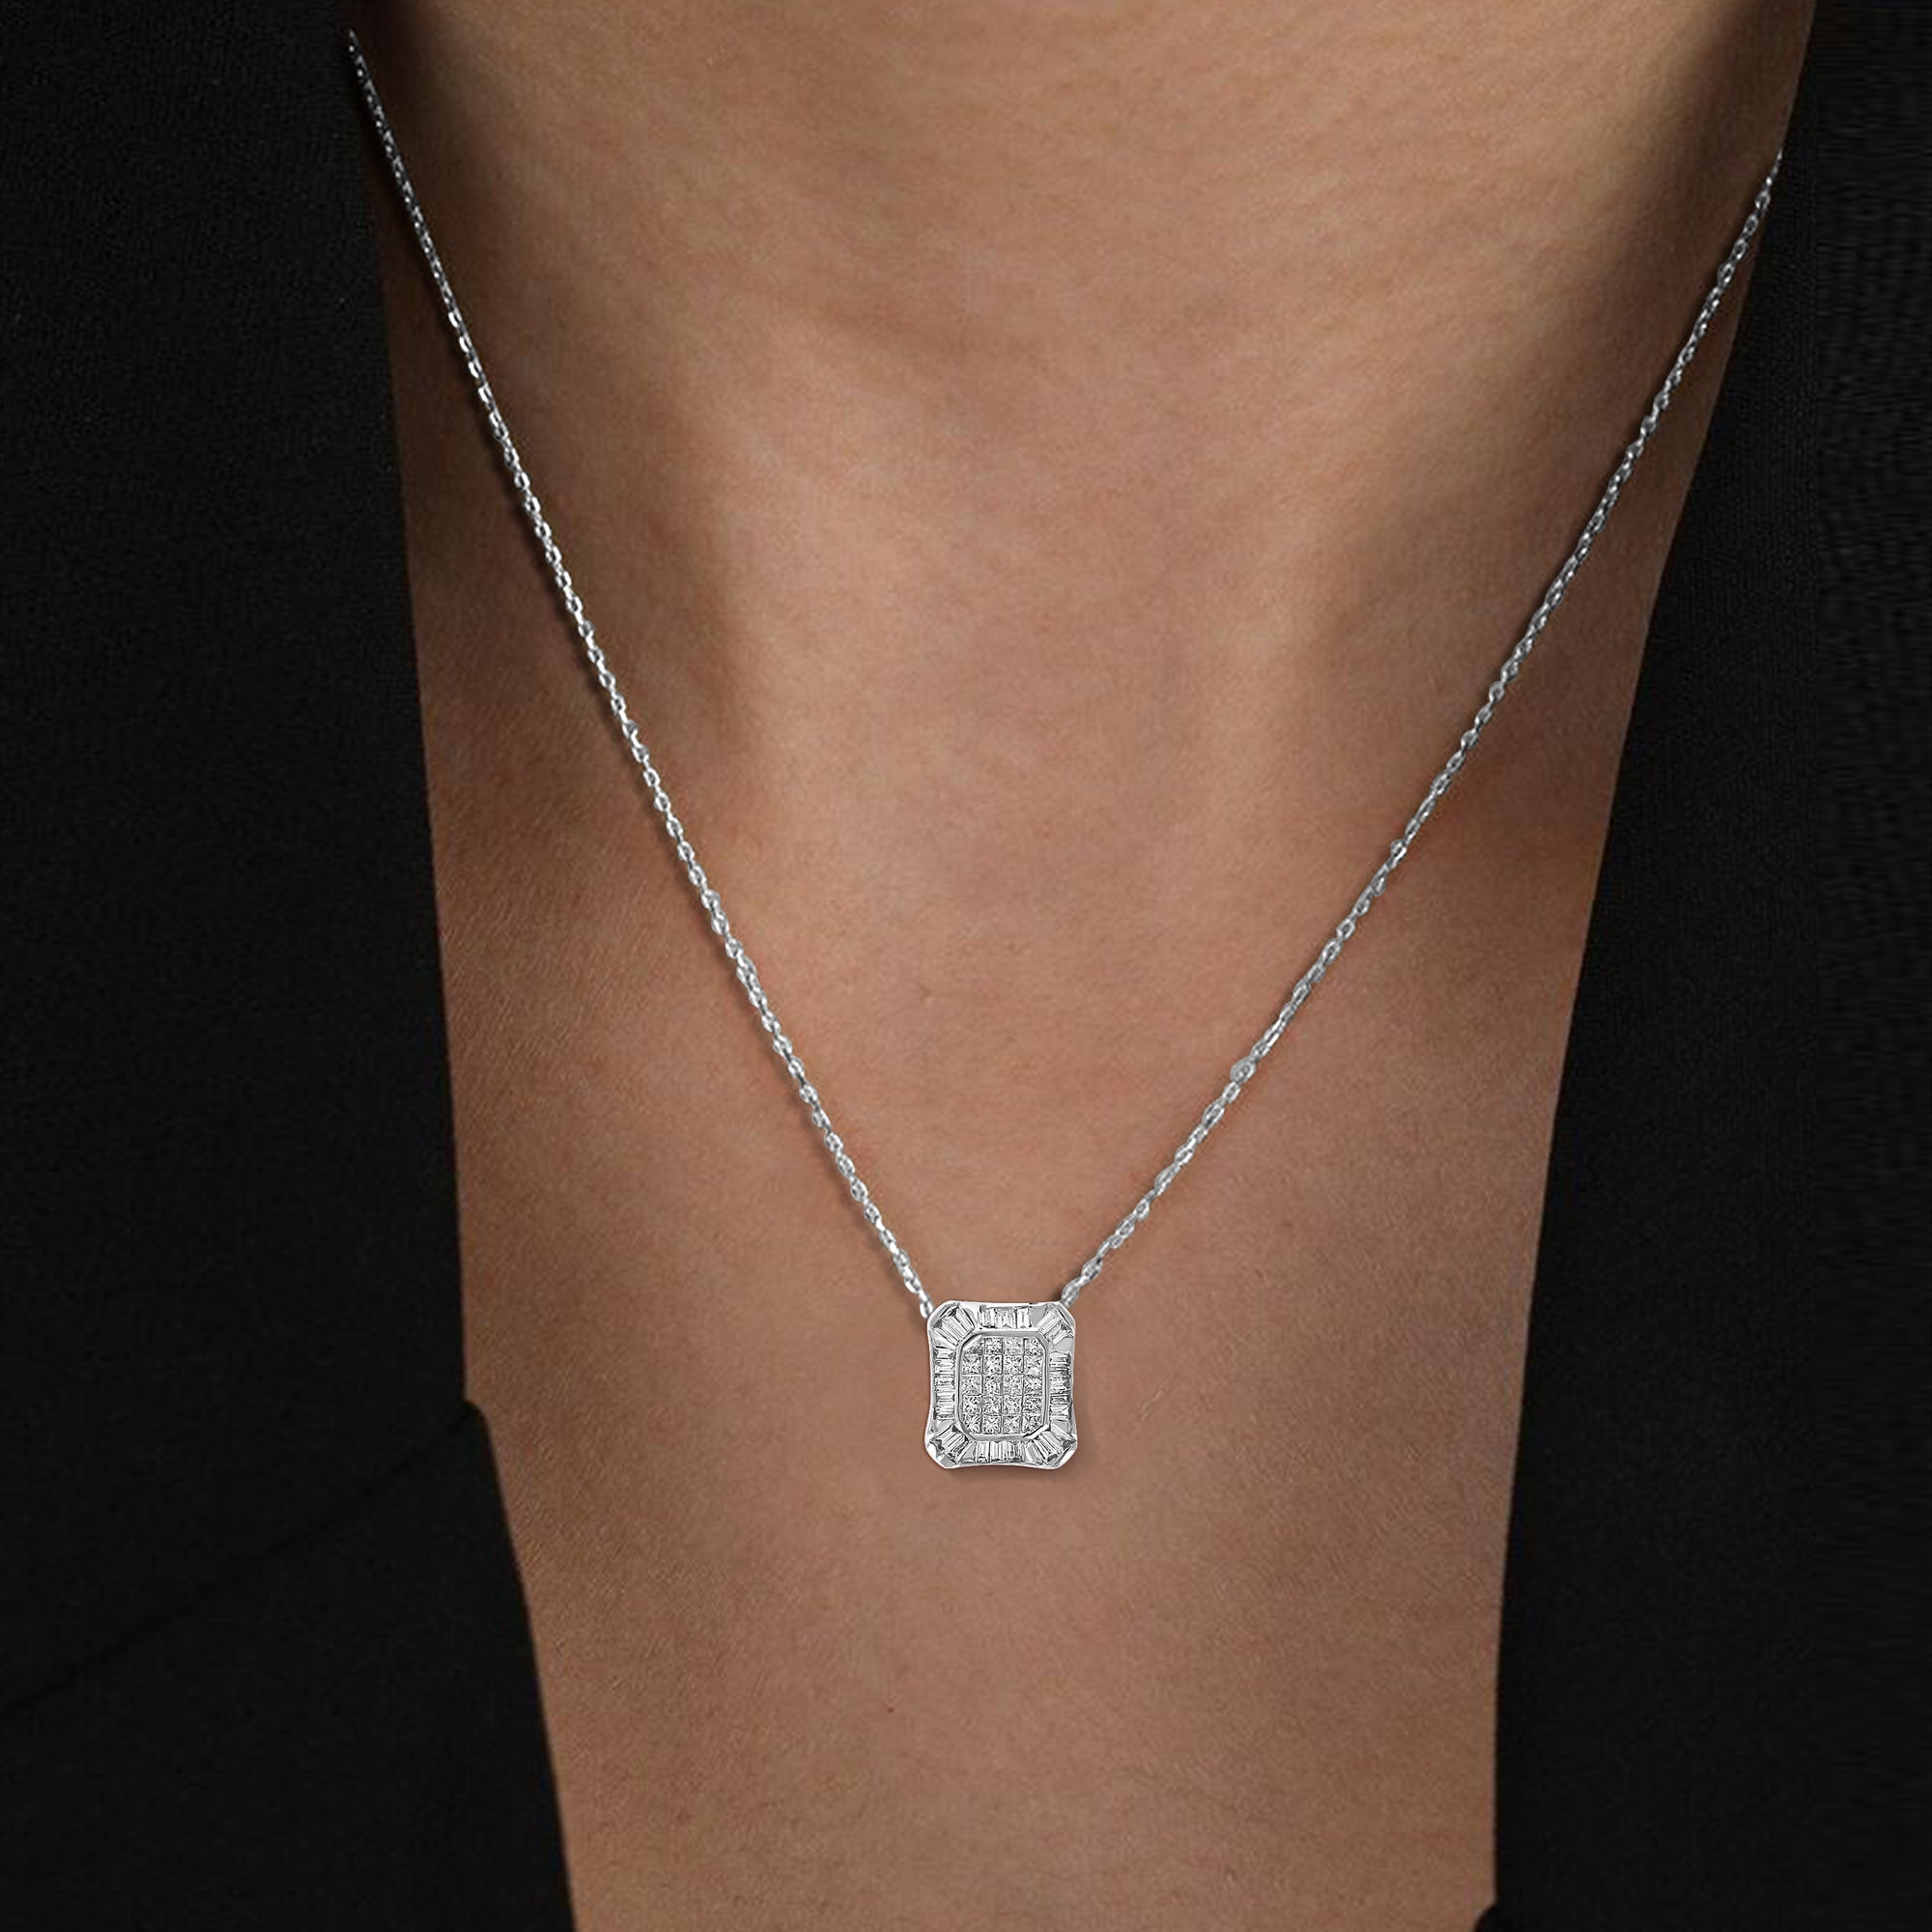 1/2 cttw Diamond Pendant, princess and Baguette Diamond Composite Pendant Necklace for Women in 14K White Gold with 18 Inch Chain, Prong Setting